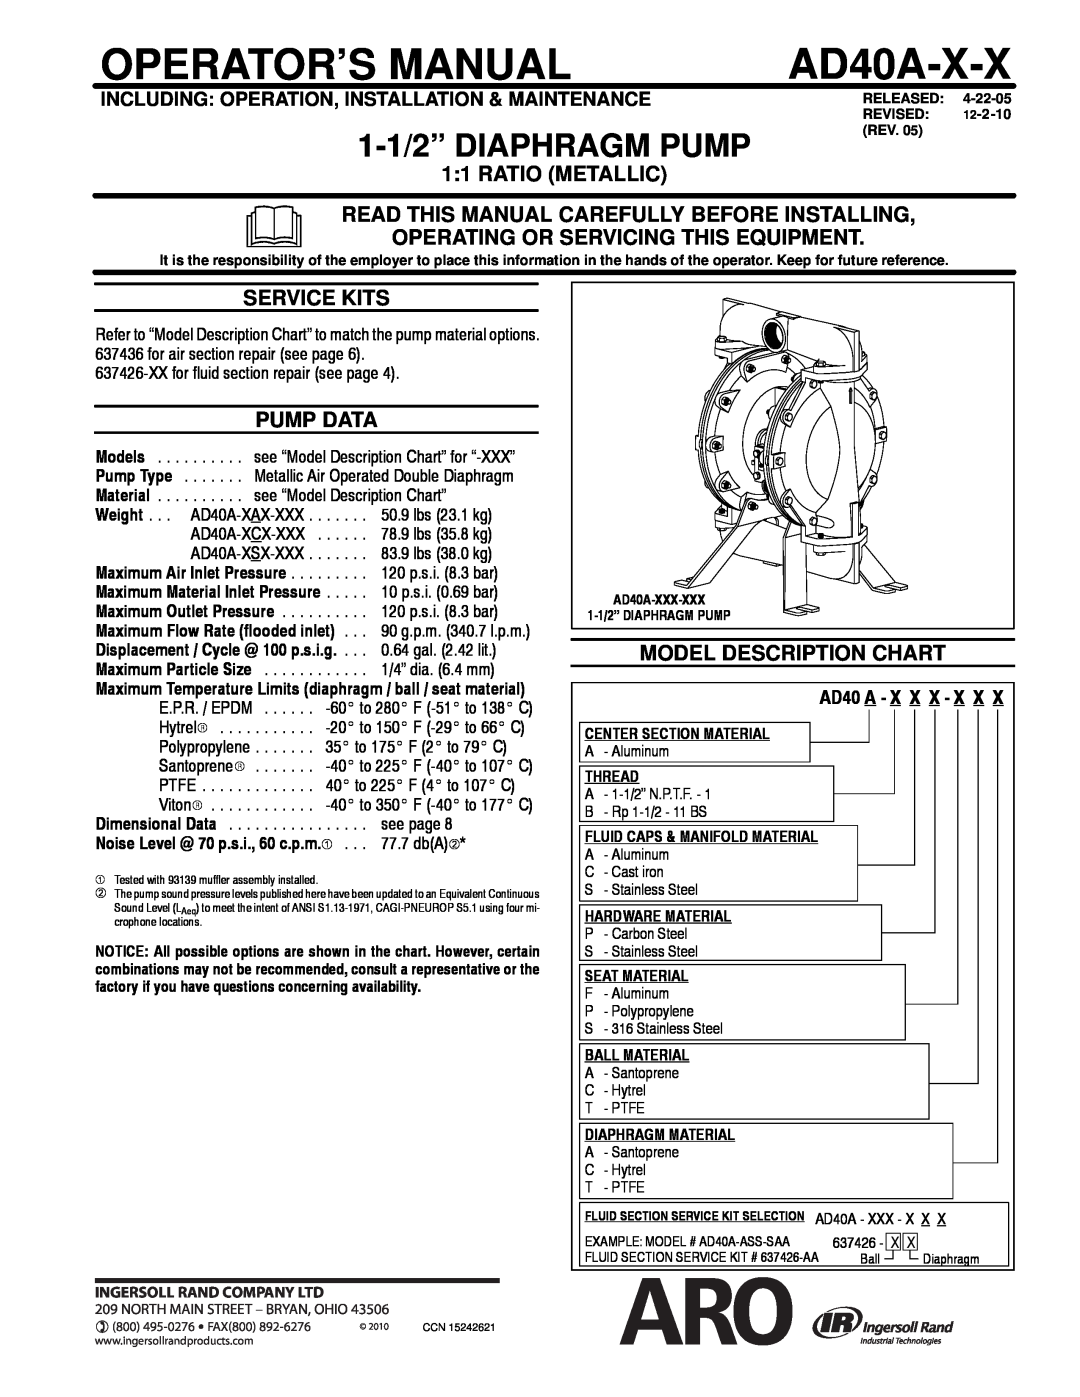 Ingersoll-Rand AD40A-X-X manual 1 1 RATIO METALLIC, Read This Manual Carefully Before Installing, Service Kits, Pump Data 